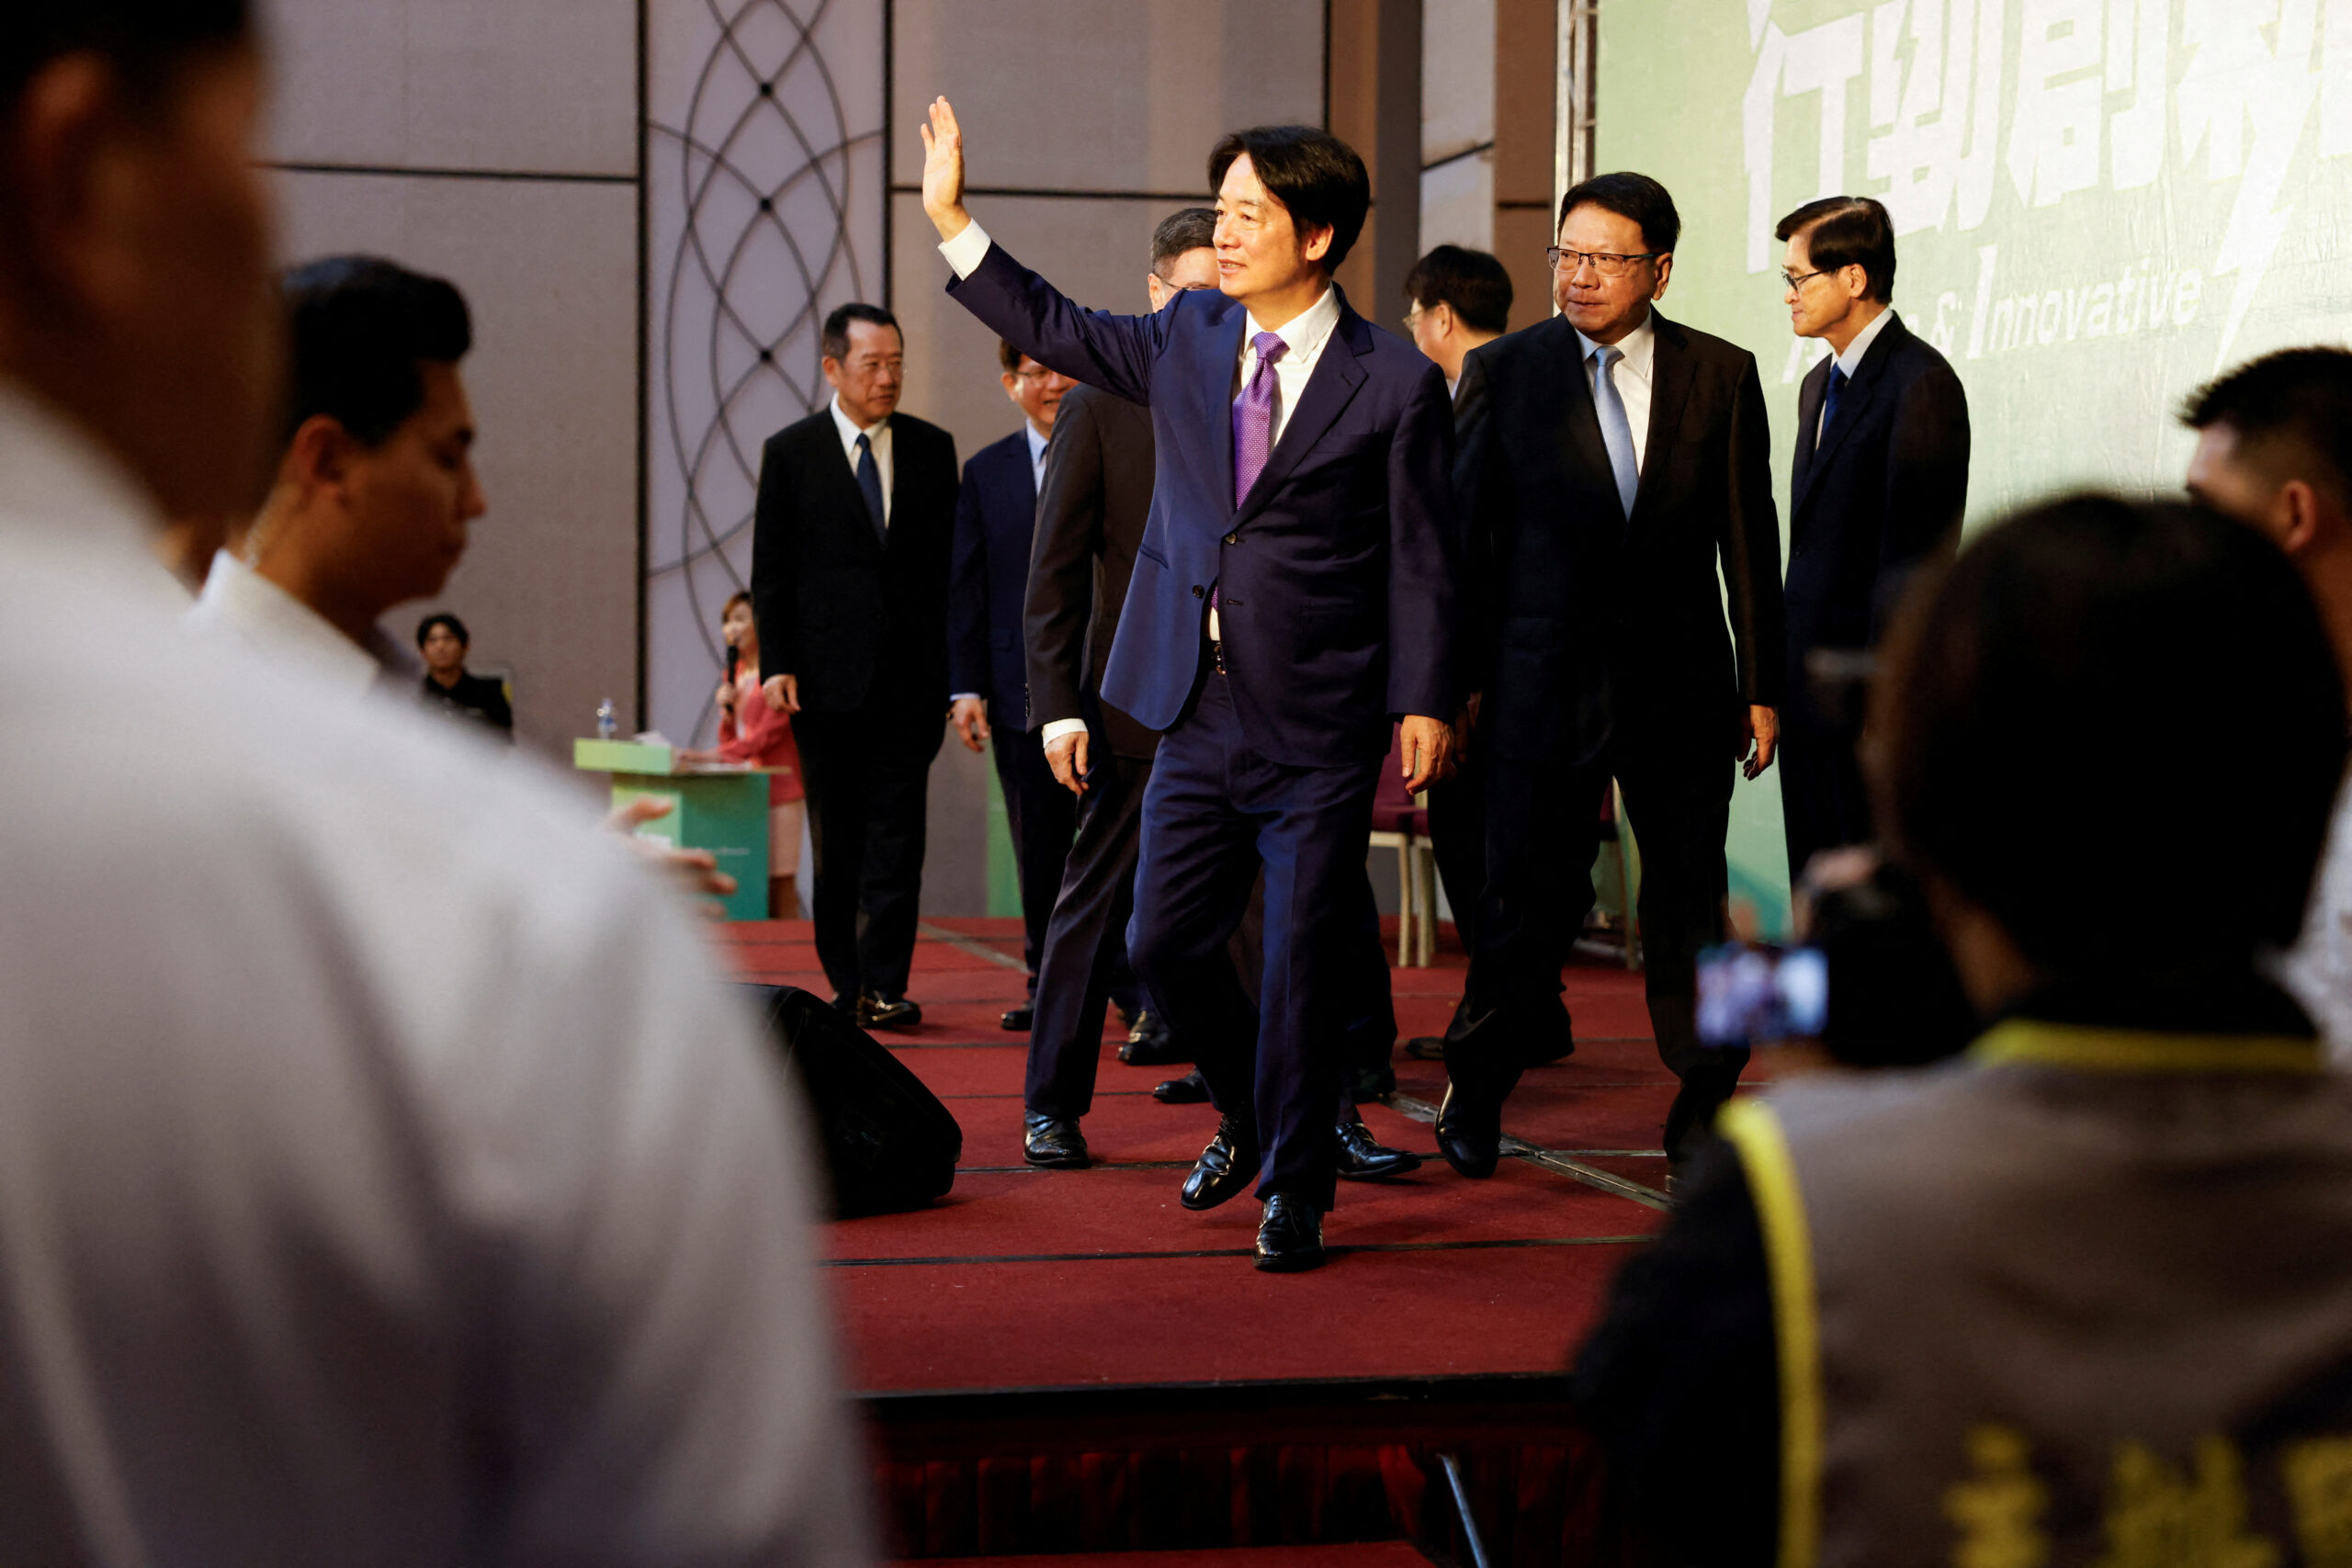 Taiwan To Install New President On May 20, Chinese Military Drills Anticipated